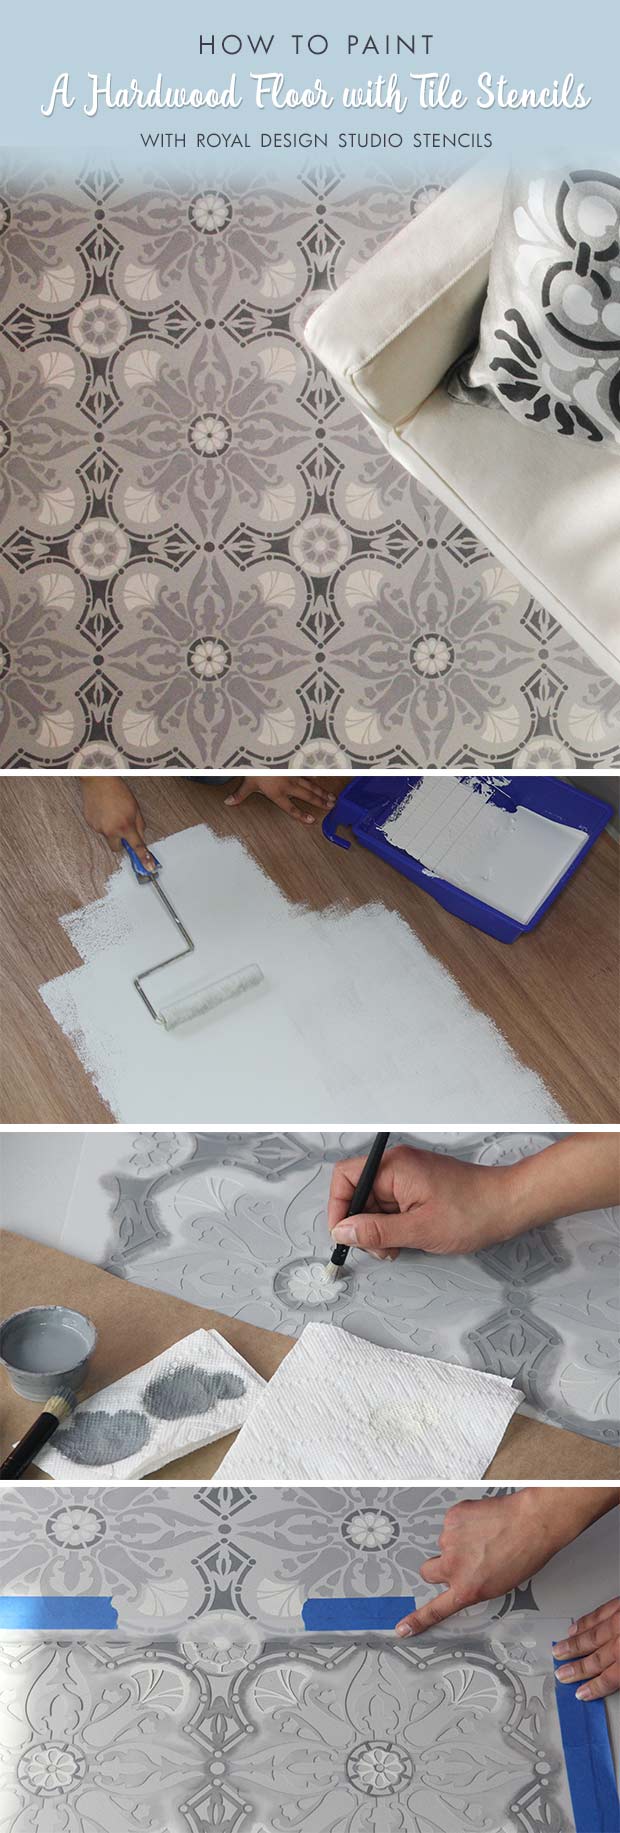 DIY Tutorial: How to Paint a Hardwood Floor with Tile Stencils from Royal Design Studio